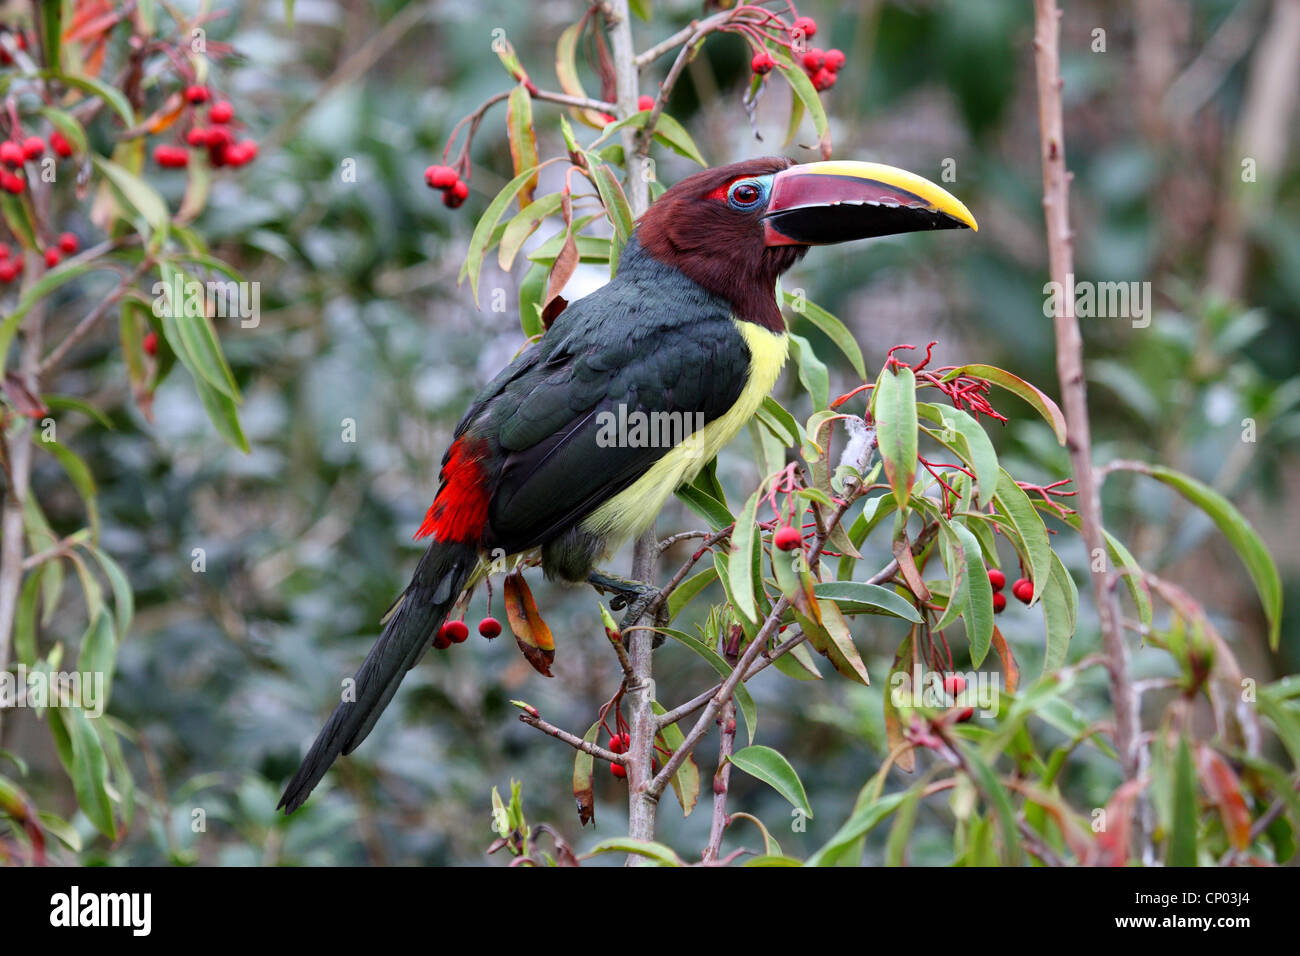 green aracari (Pteroglossus viridis), sitting on a branch with red berries, Guayana Stock Photo